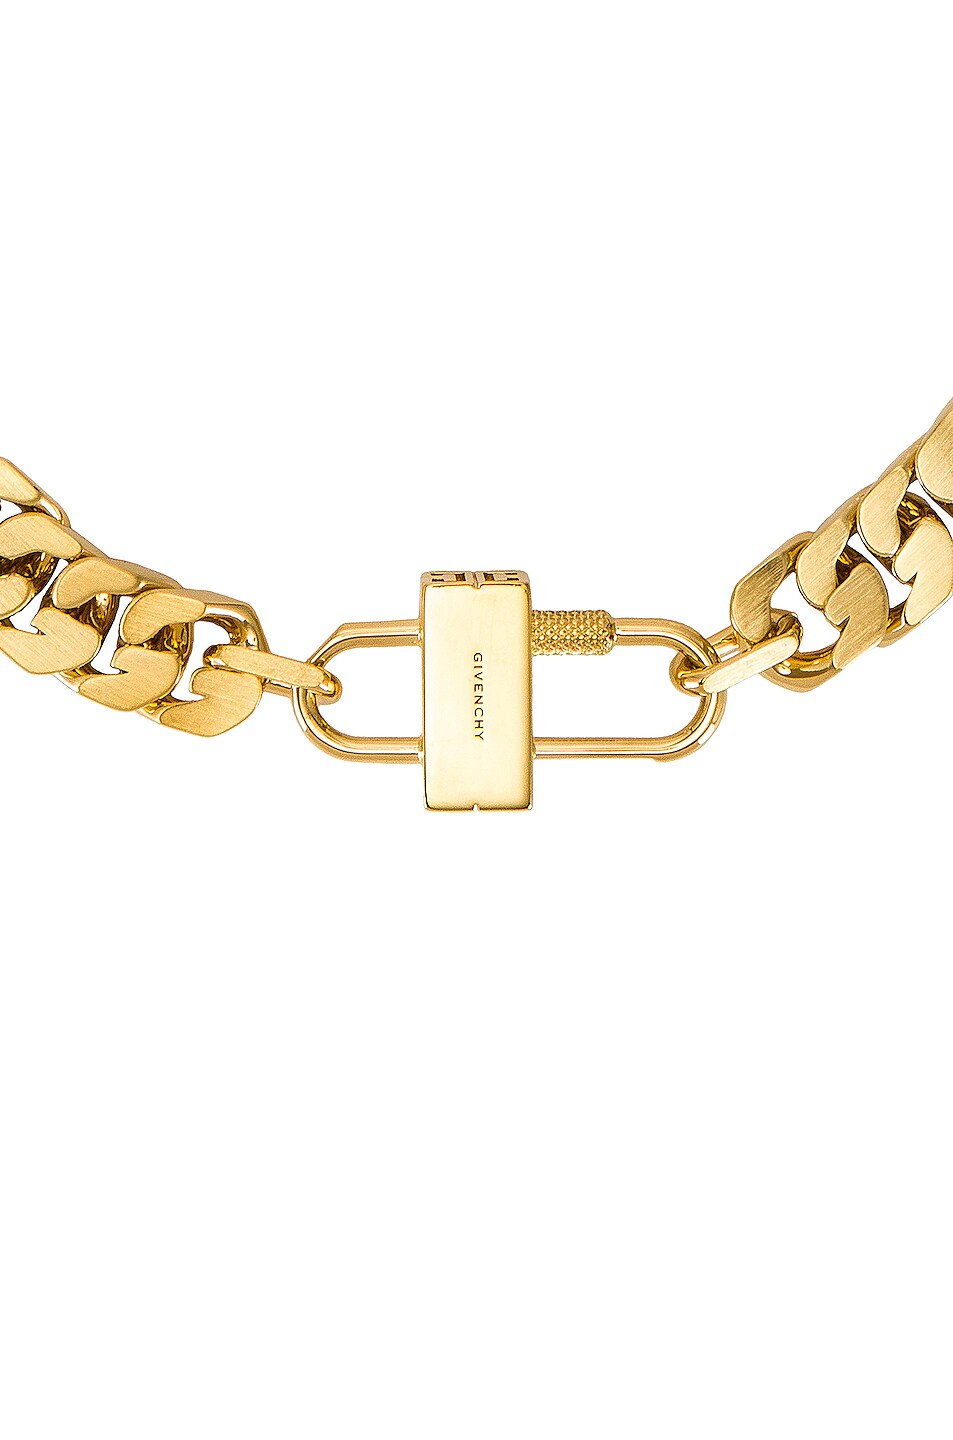 Givenchy G Chain Lock Small Necklace in Golden Yellow | FWRD